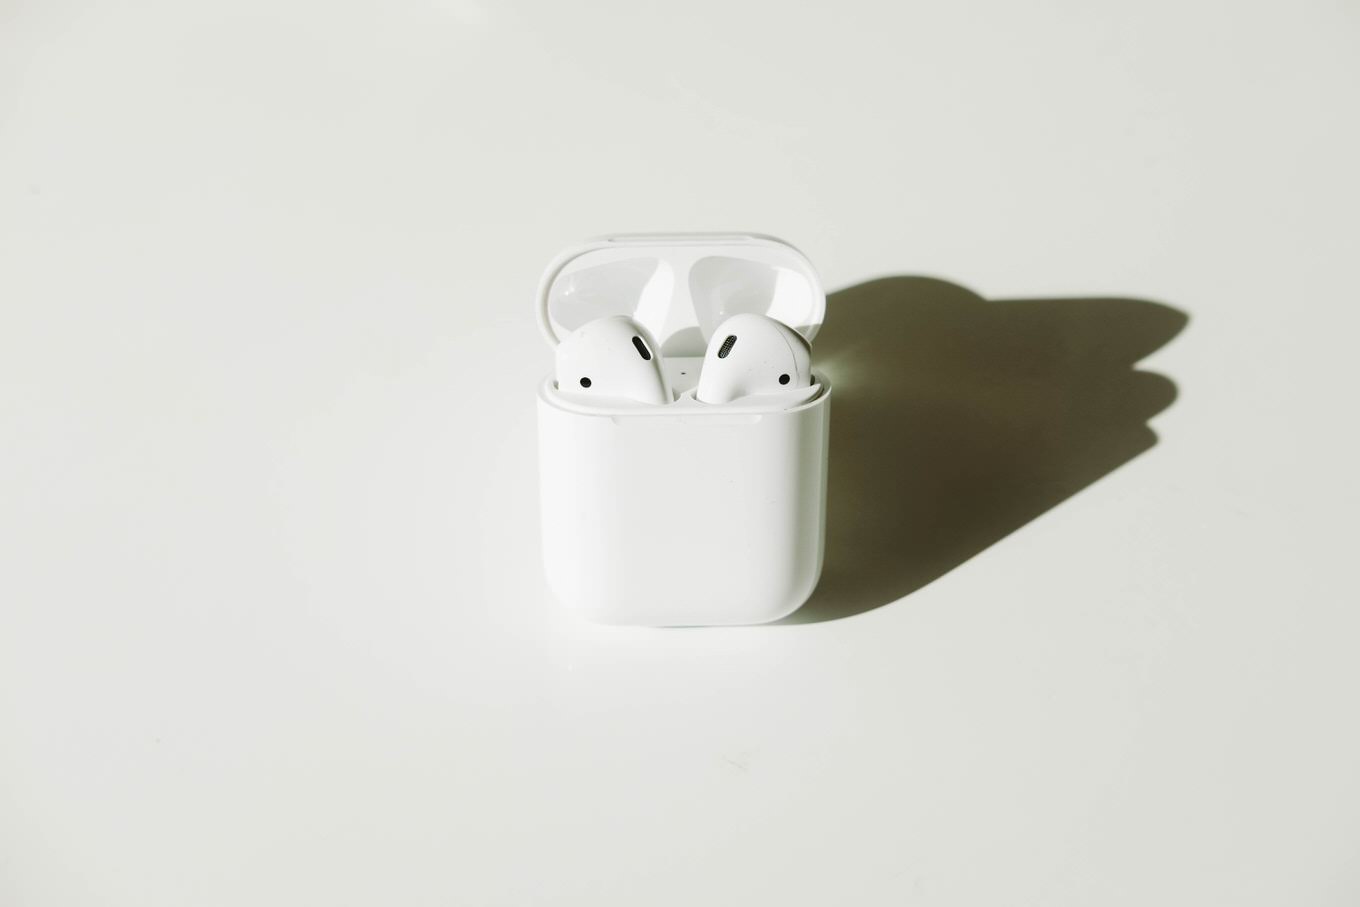 「AirPods」シリーズは来年刷新、AirPods Proはデザインも変更